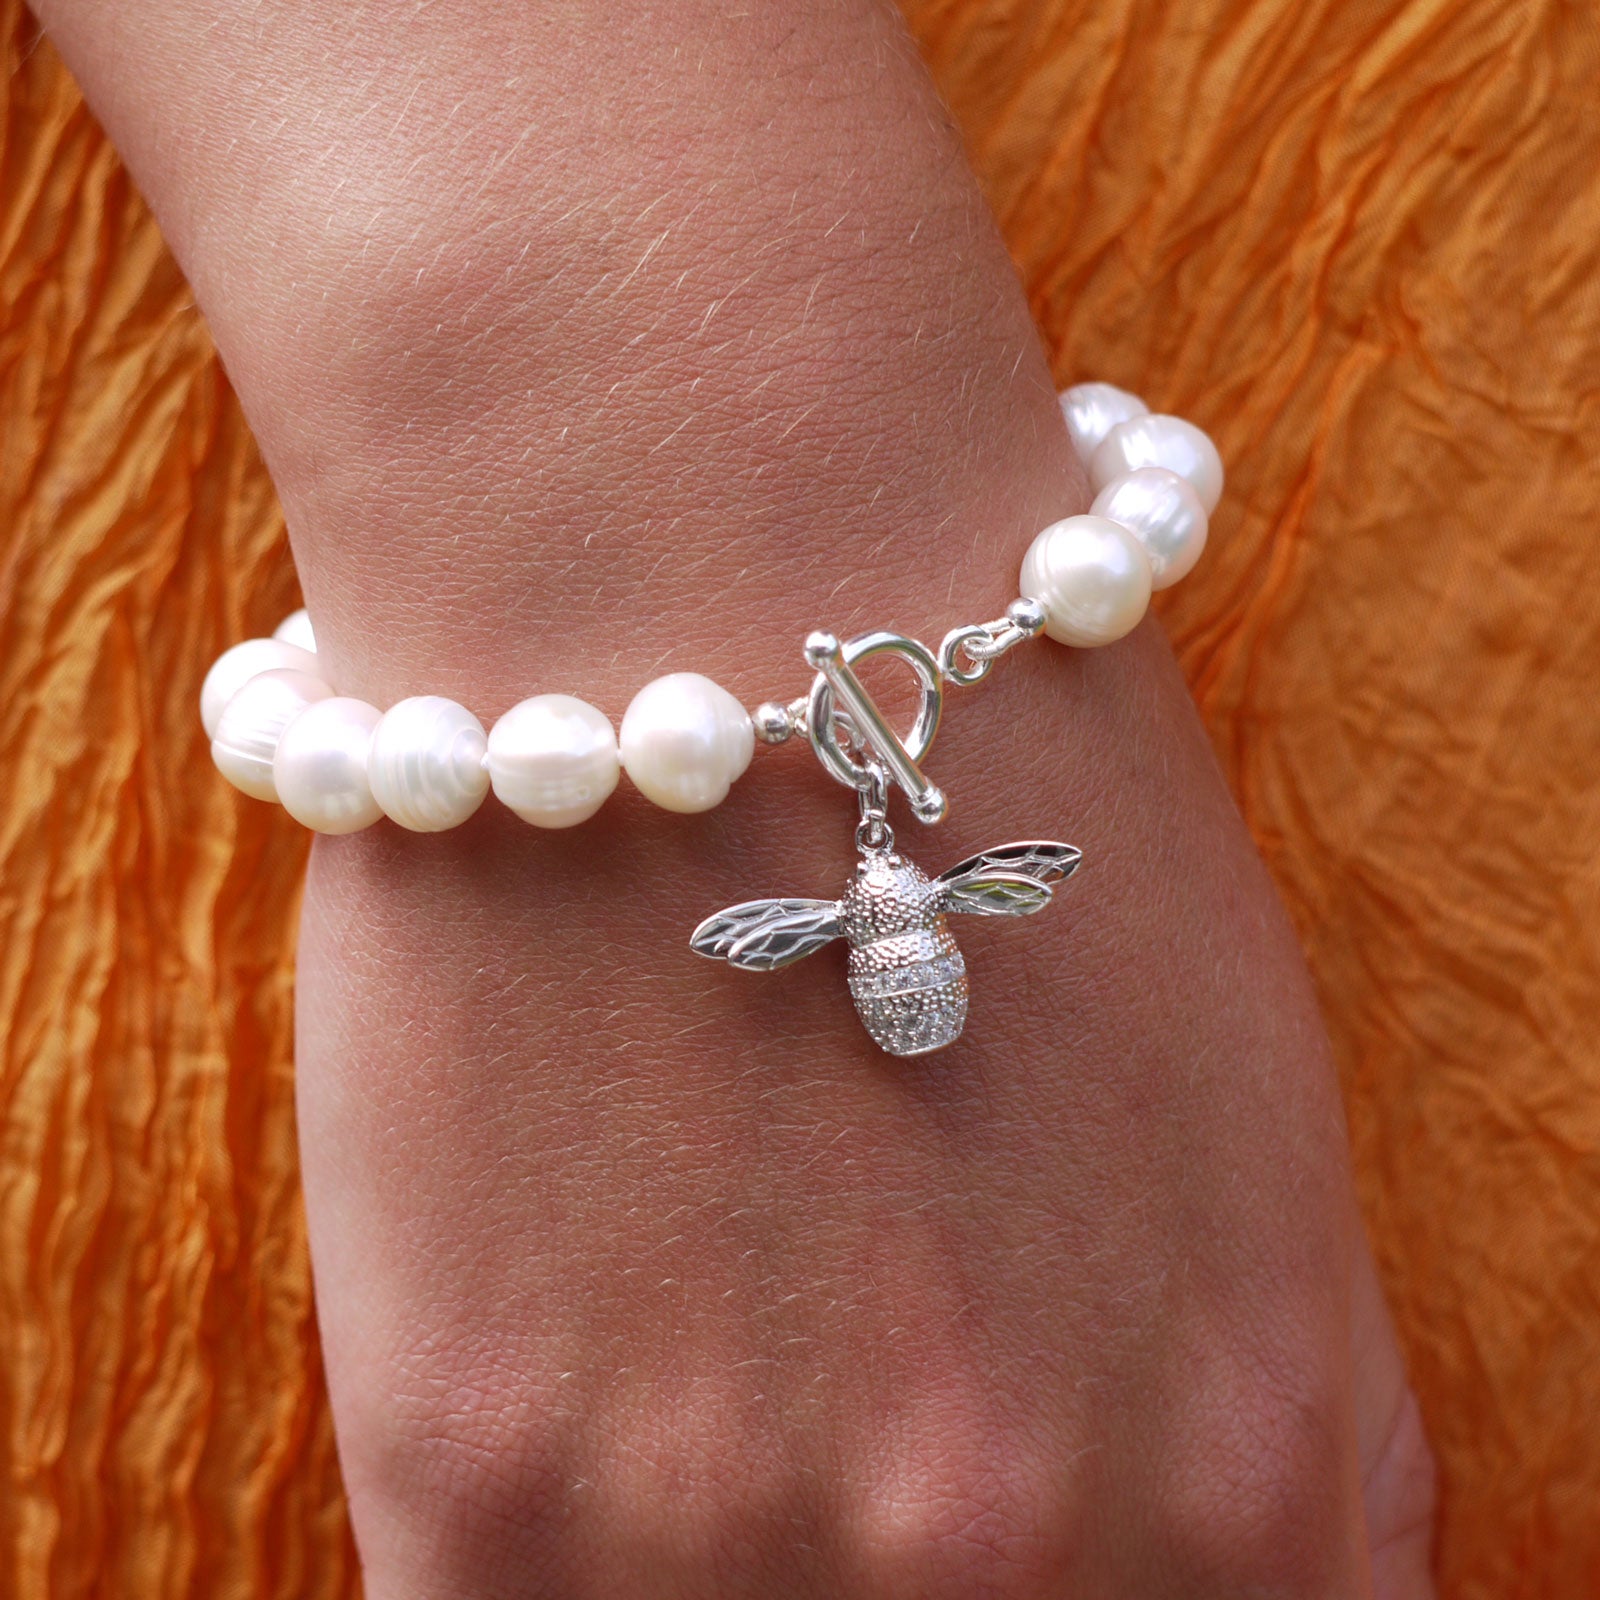 White freshwater pearls and silver bee charm